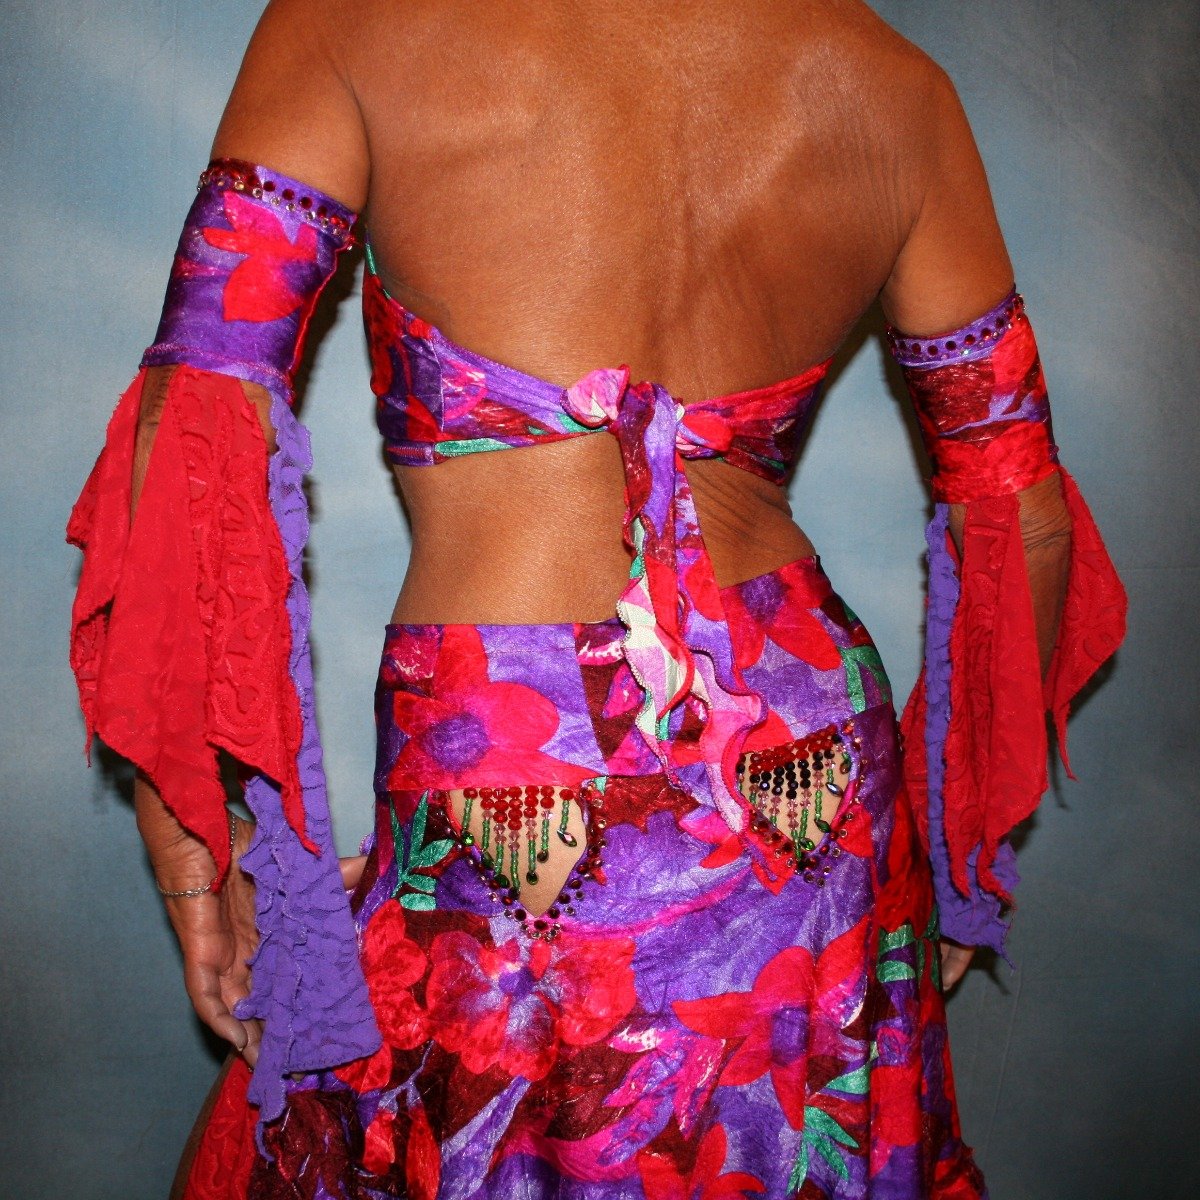 Crystal's Creations back close up view of Red & purple tropical print 2 piece Latin/rhythm dress was created in tropical print lycra in deep reds,purples & a touch of green, along with accents of deep red textured chiffon scarf cut flounces & purple stretch lace petal cut flounces on skirt and arm bands,